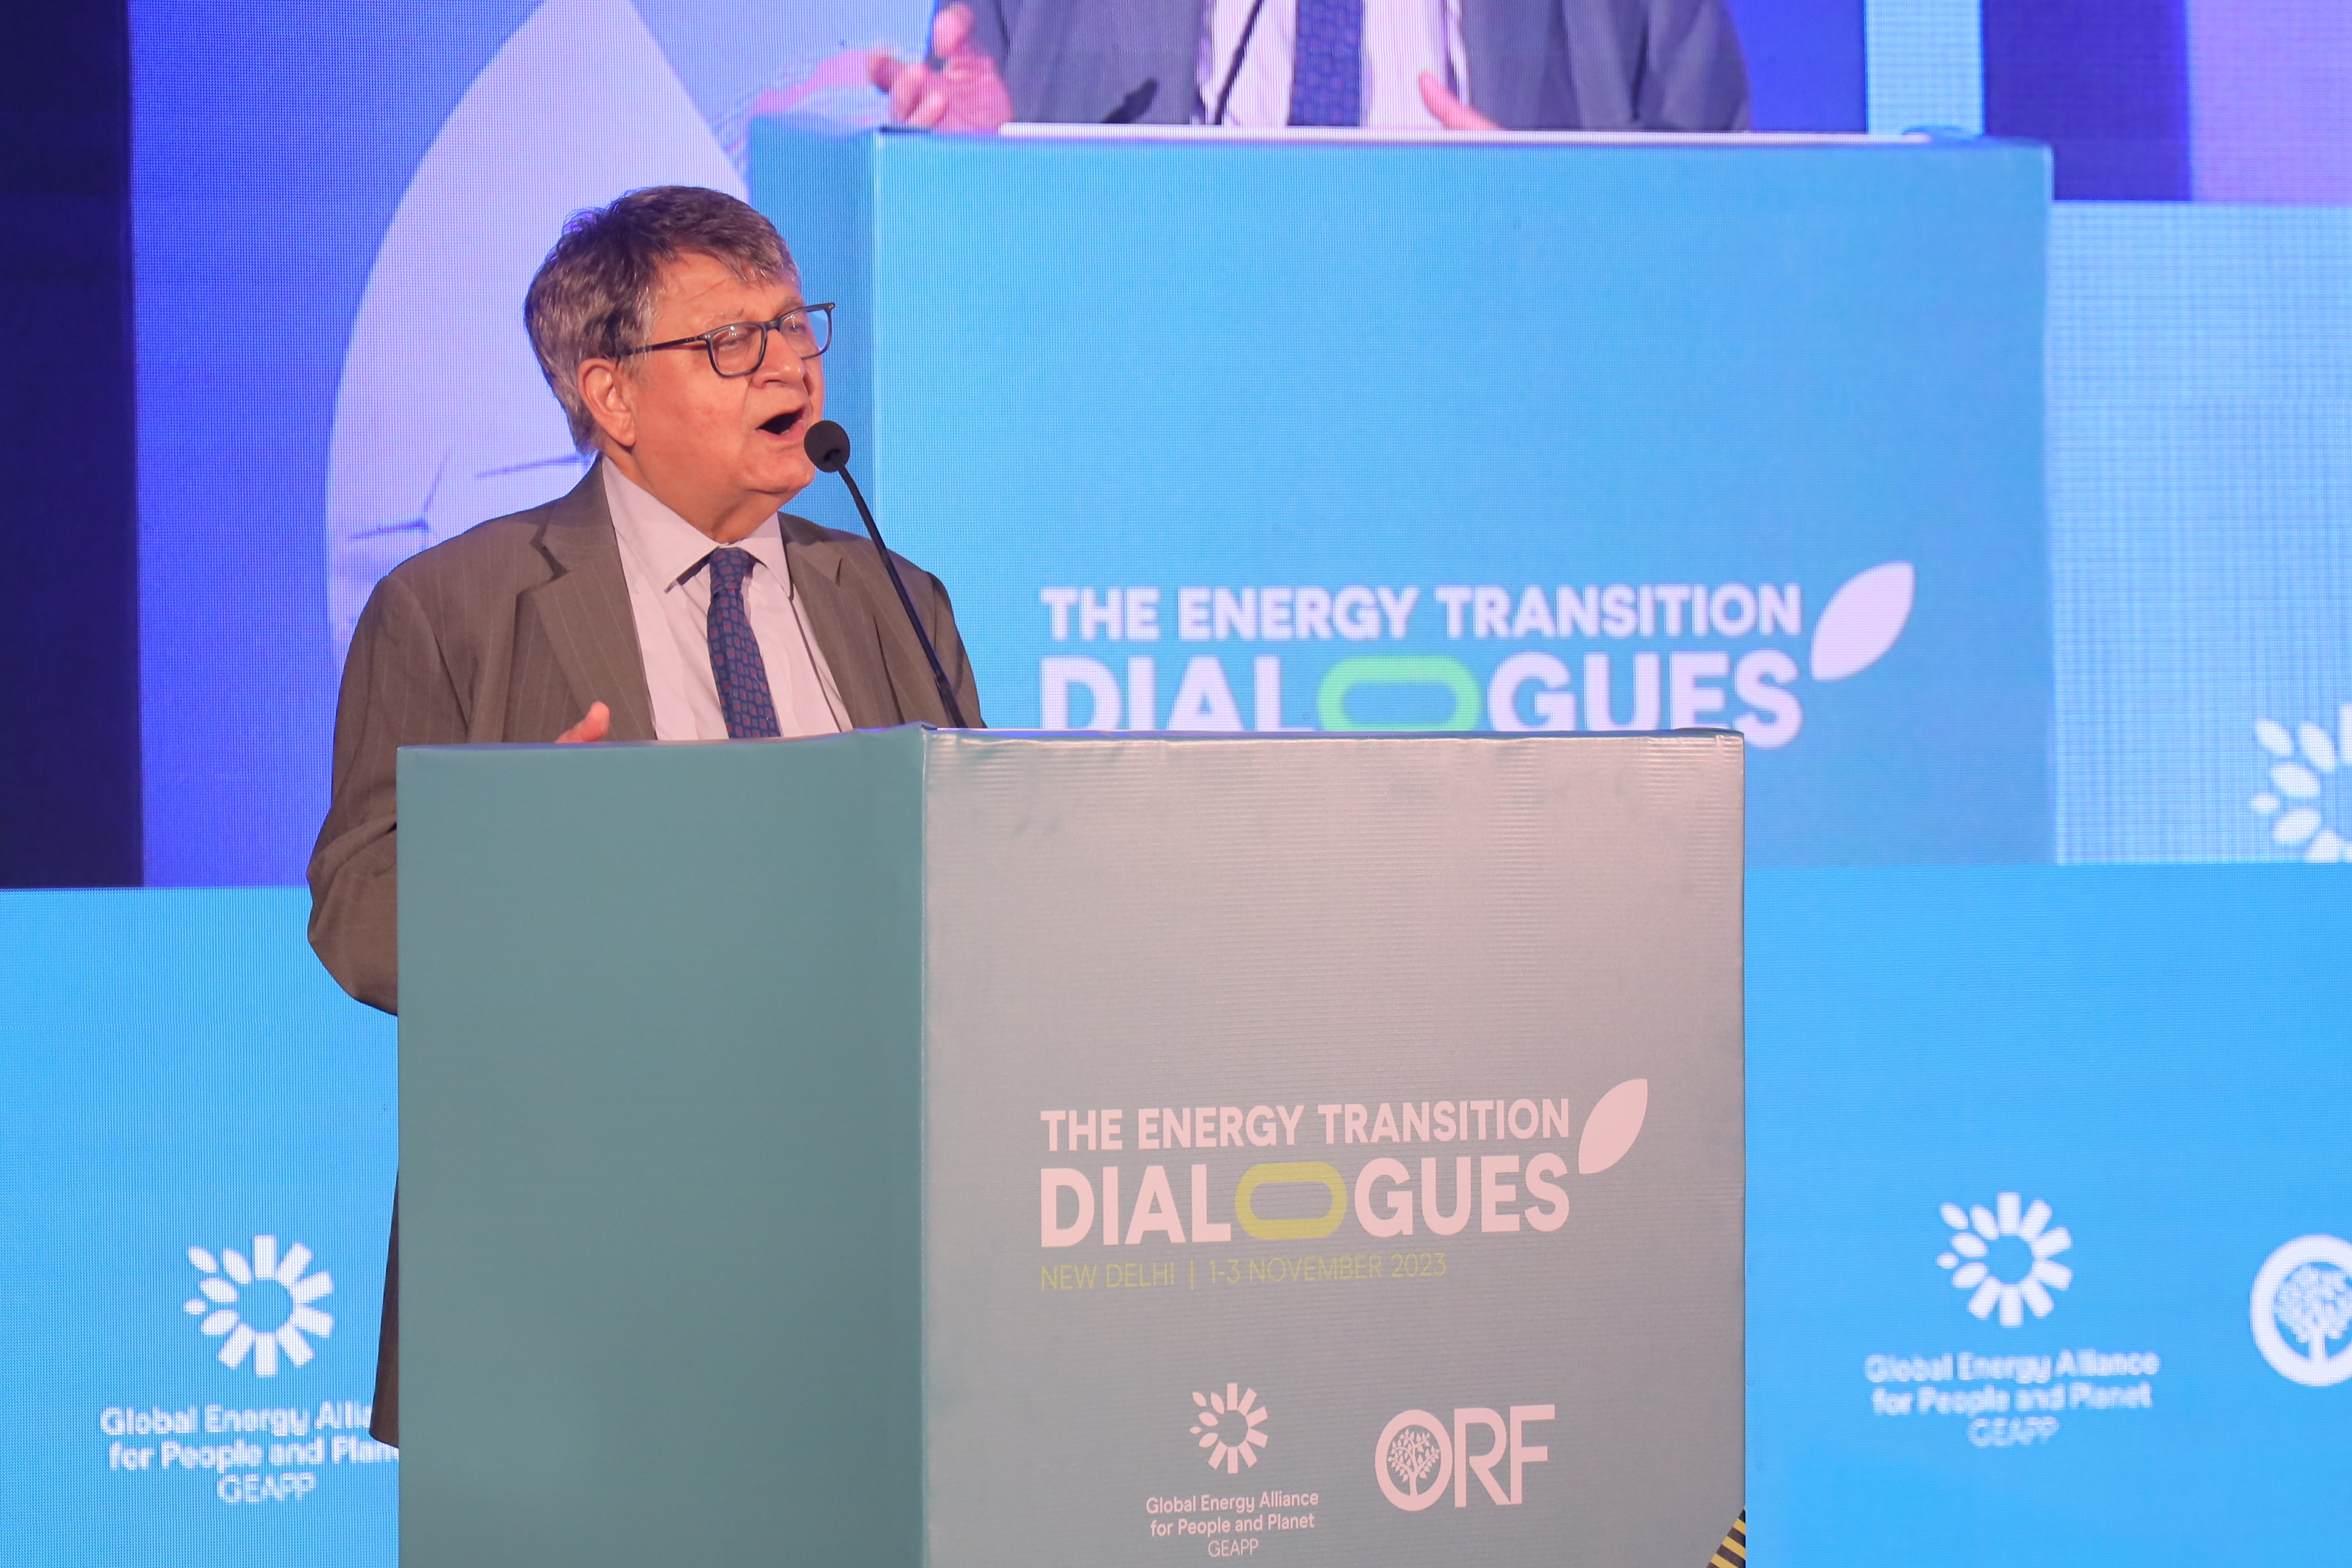 The Energy Transition Dialogues-2